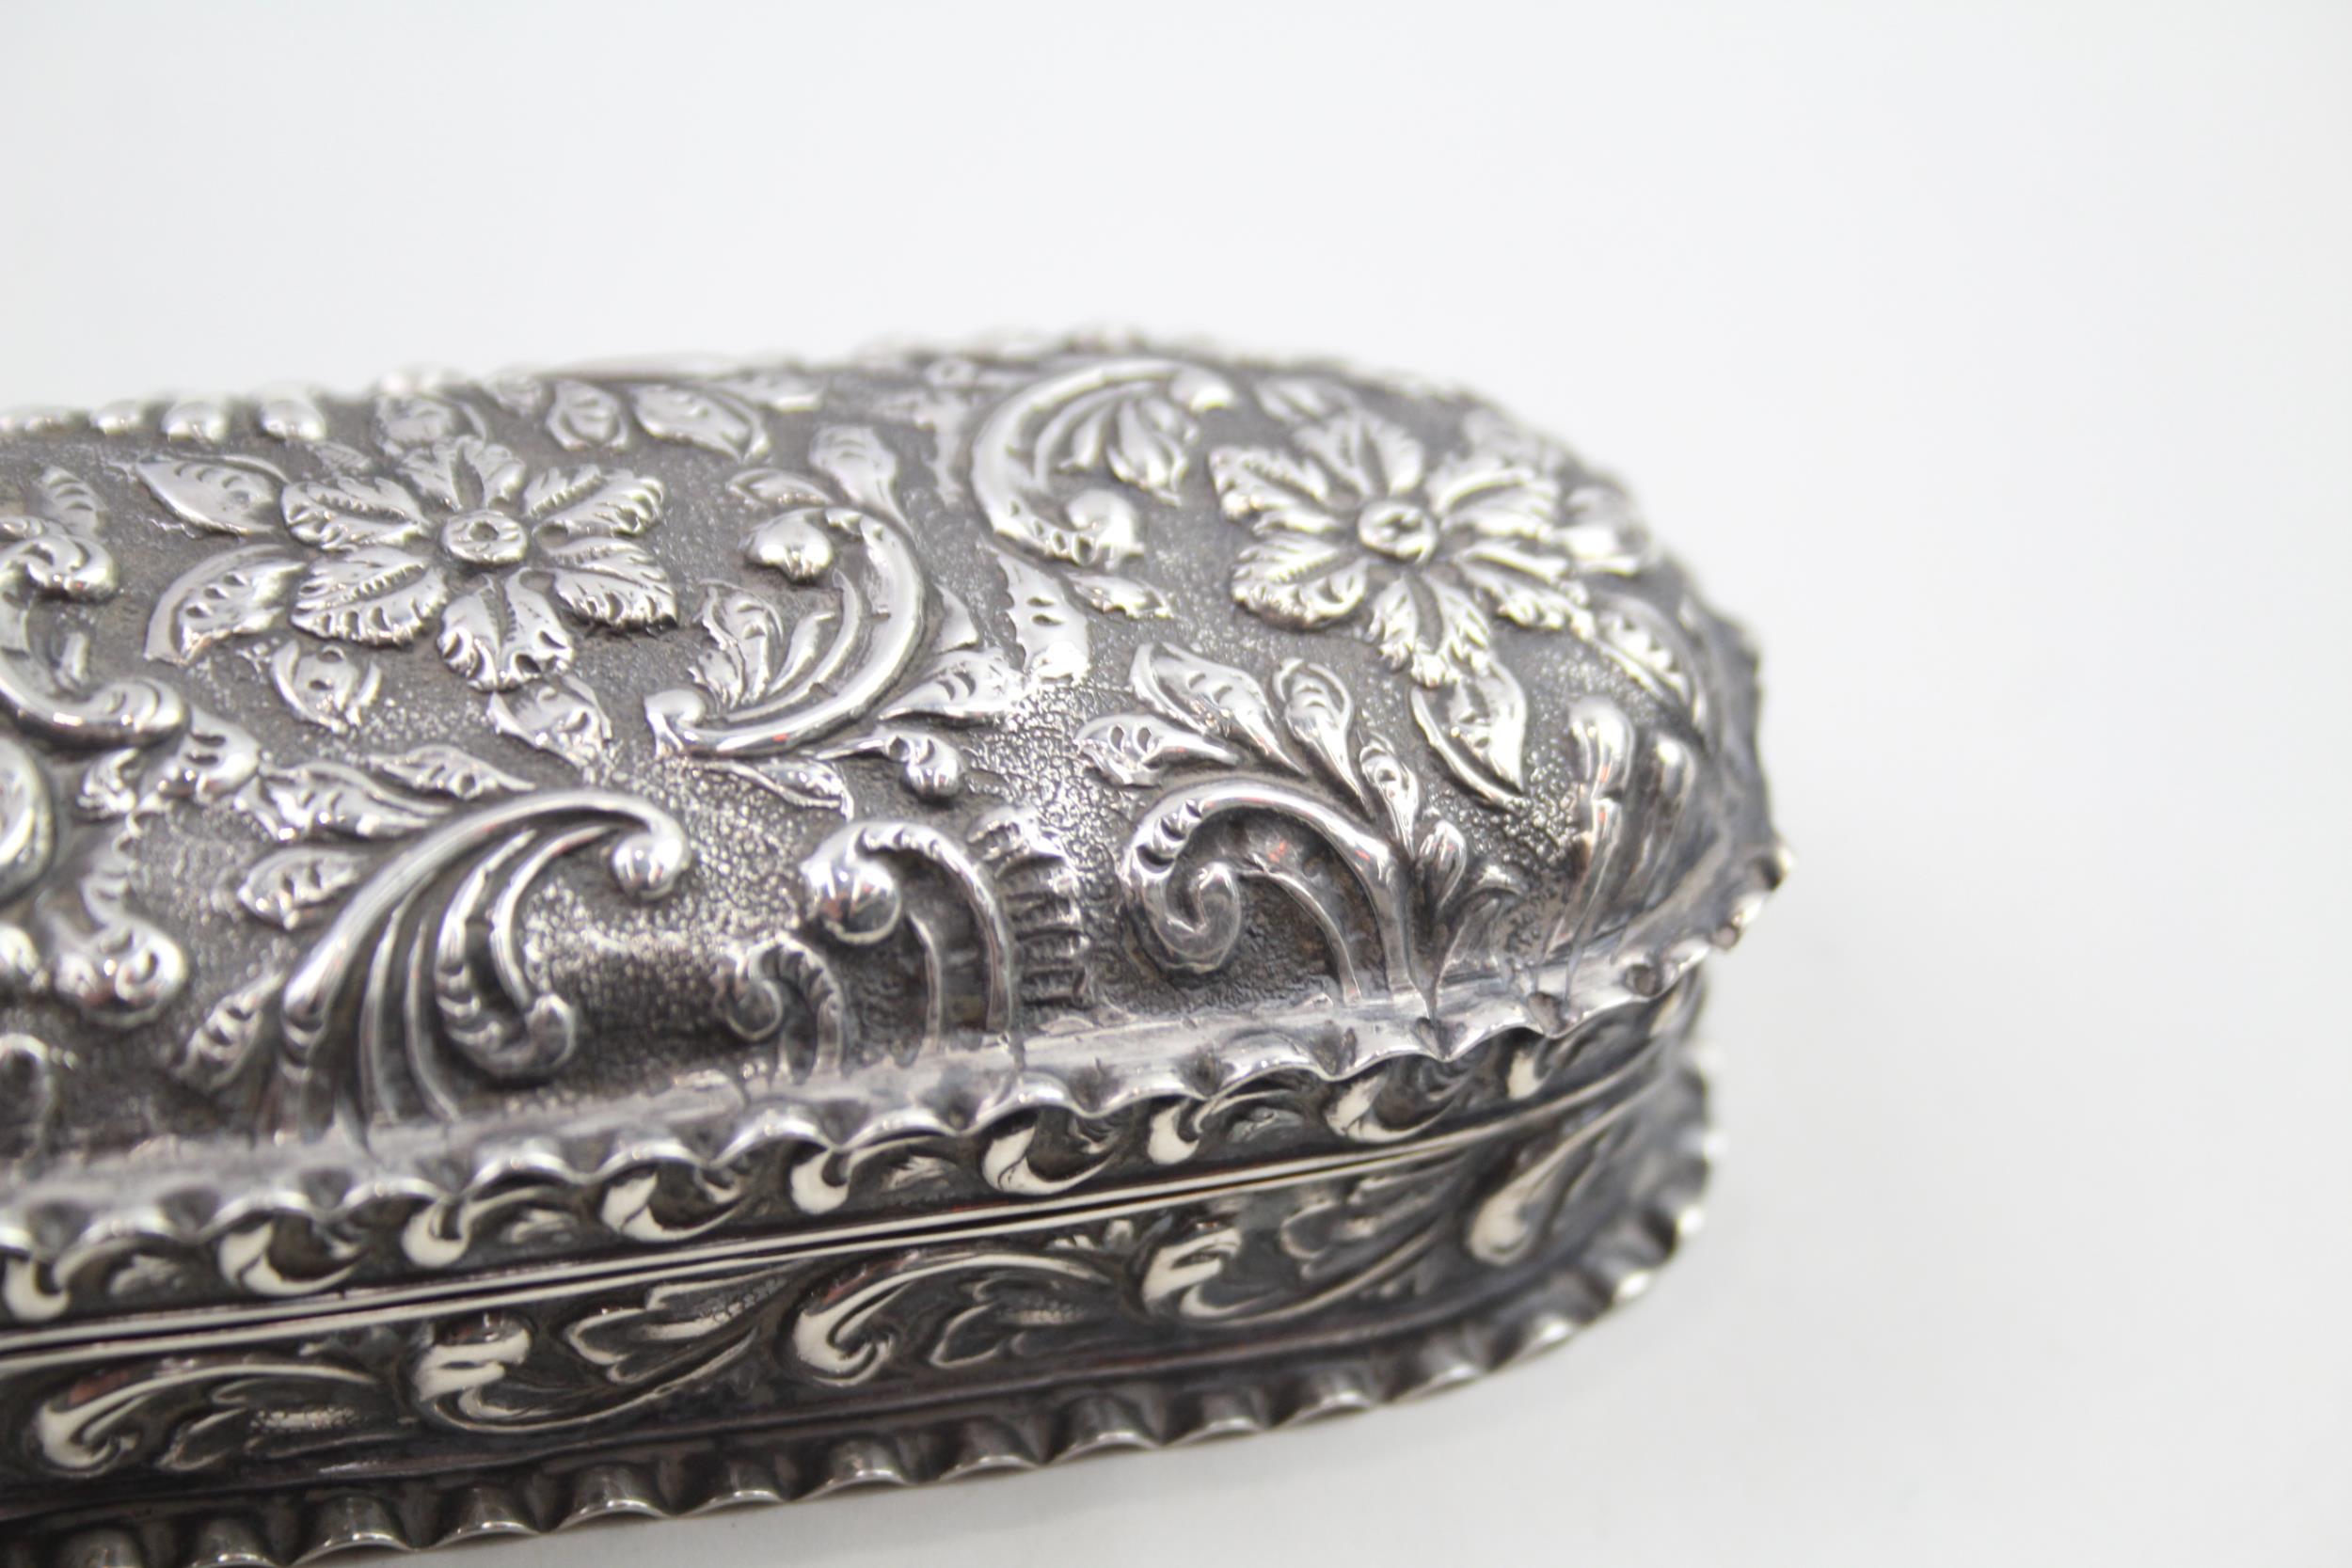 Antique Edwardian 1902 Chester Sterling Silver Long Trinket / Jewellery Box 129g - w/ Engraved - Image 4 of 8